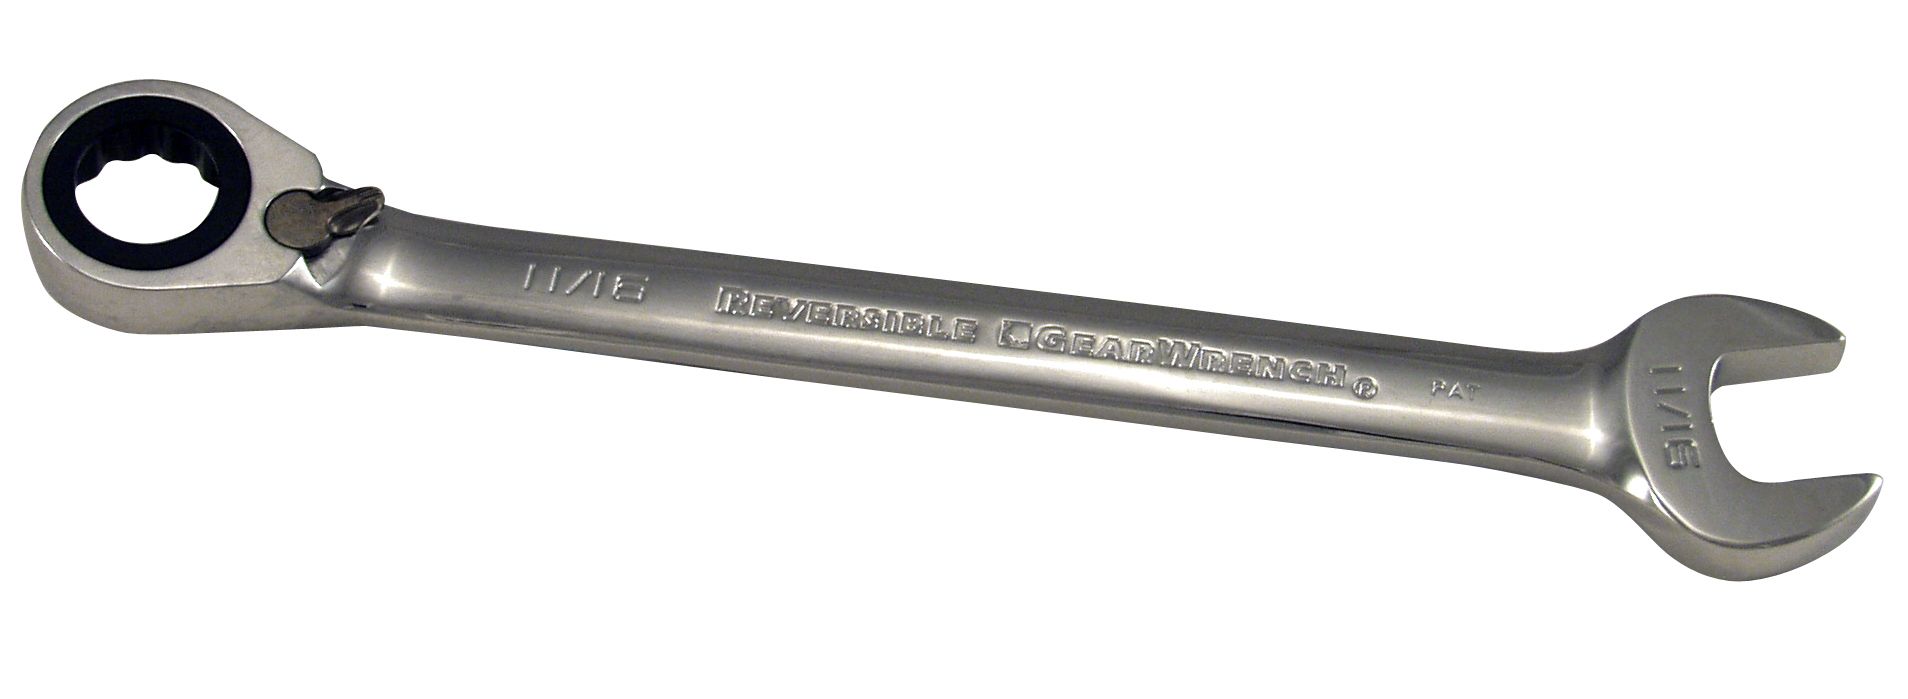 GearWrench 11/16 in. Full Polish Reversible Ratcheting Combination Wrench